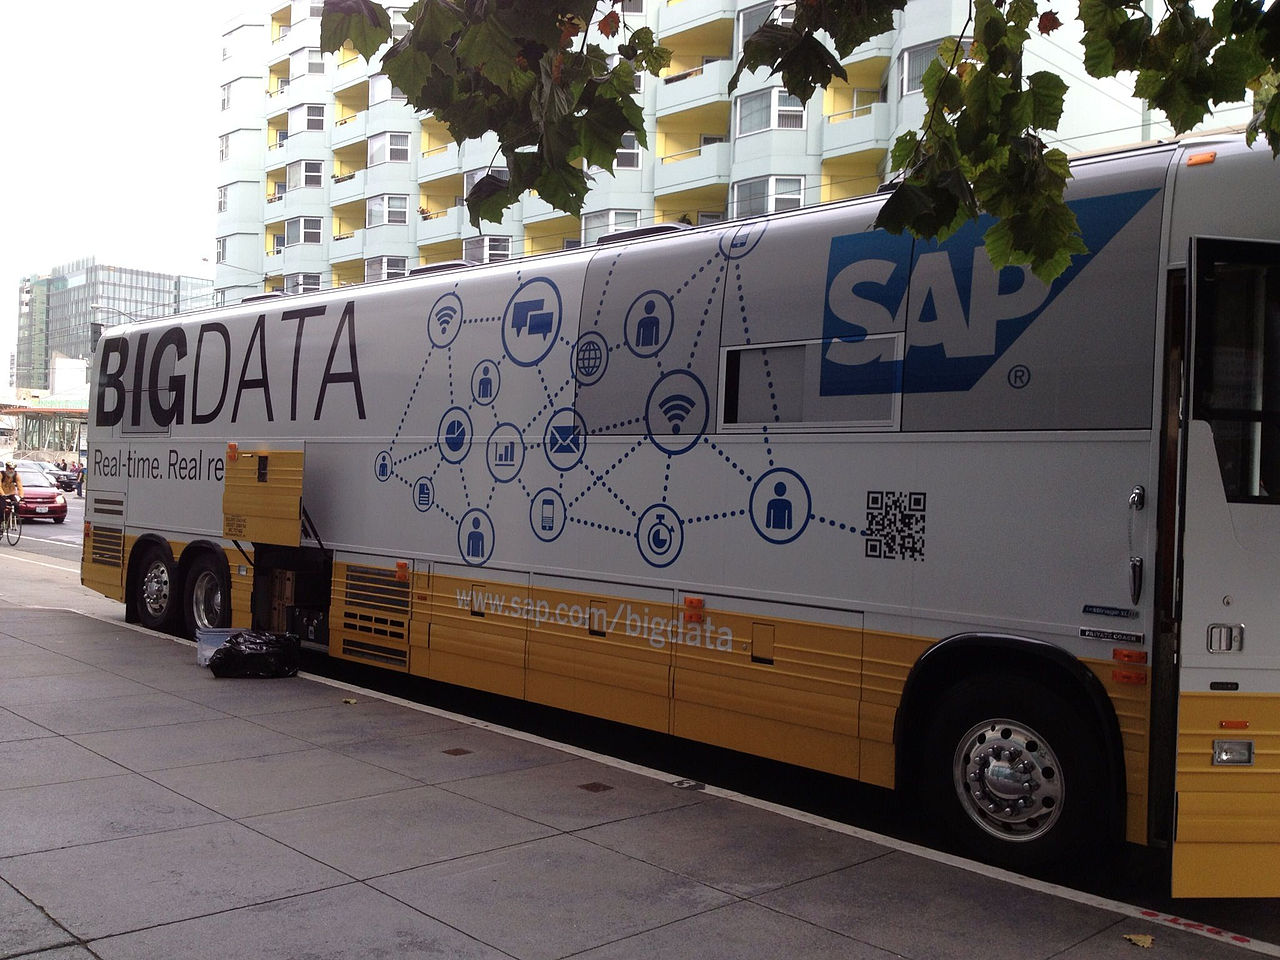 2013-09-11_Bus_wrapped_with_SAP_Big_Data_parked_outside_IDF13_(9730051783).jpg